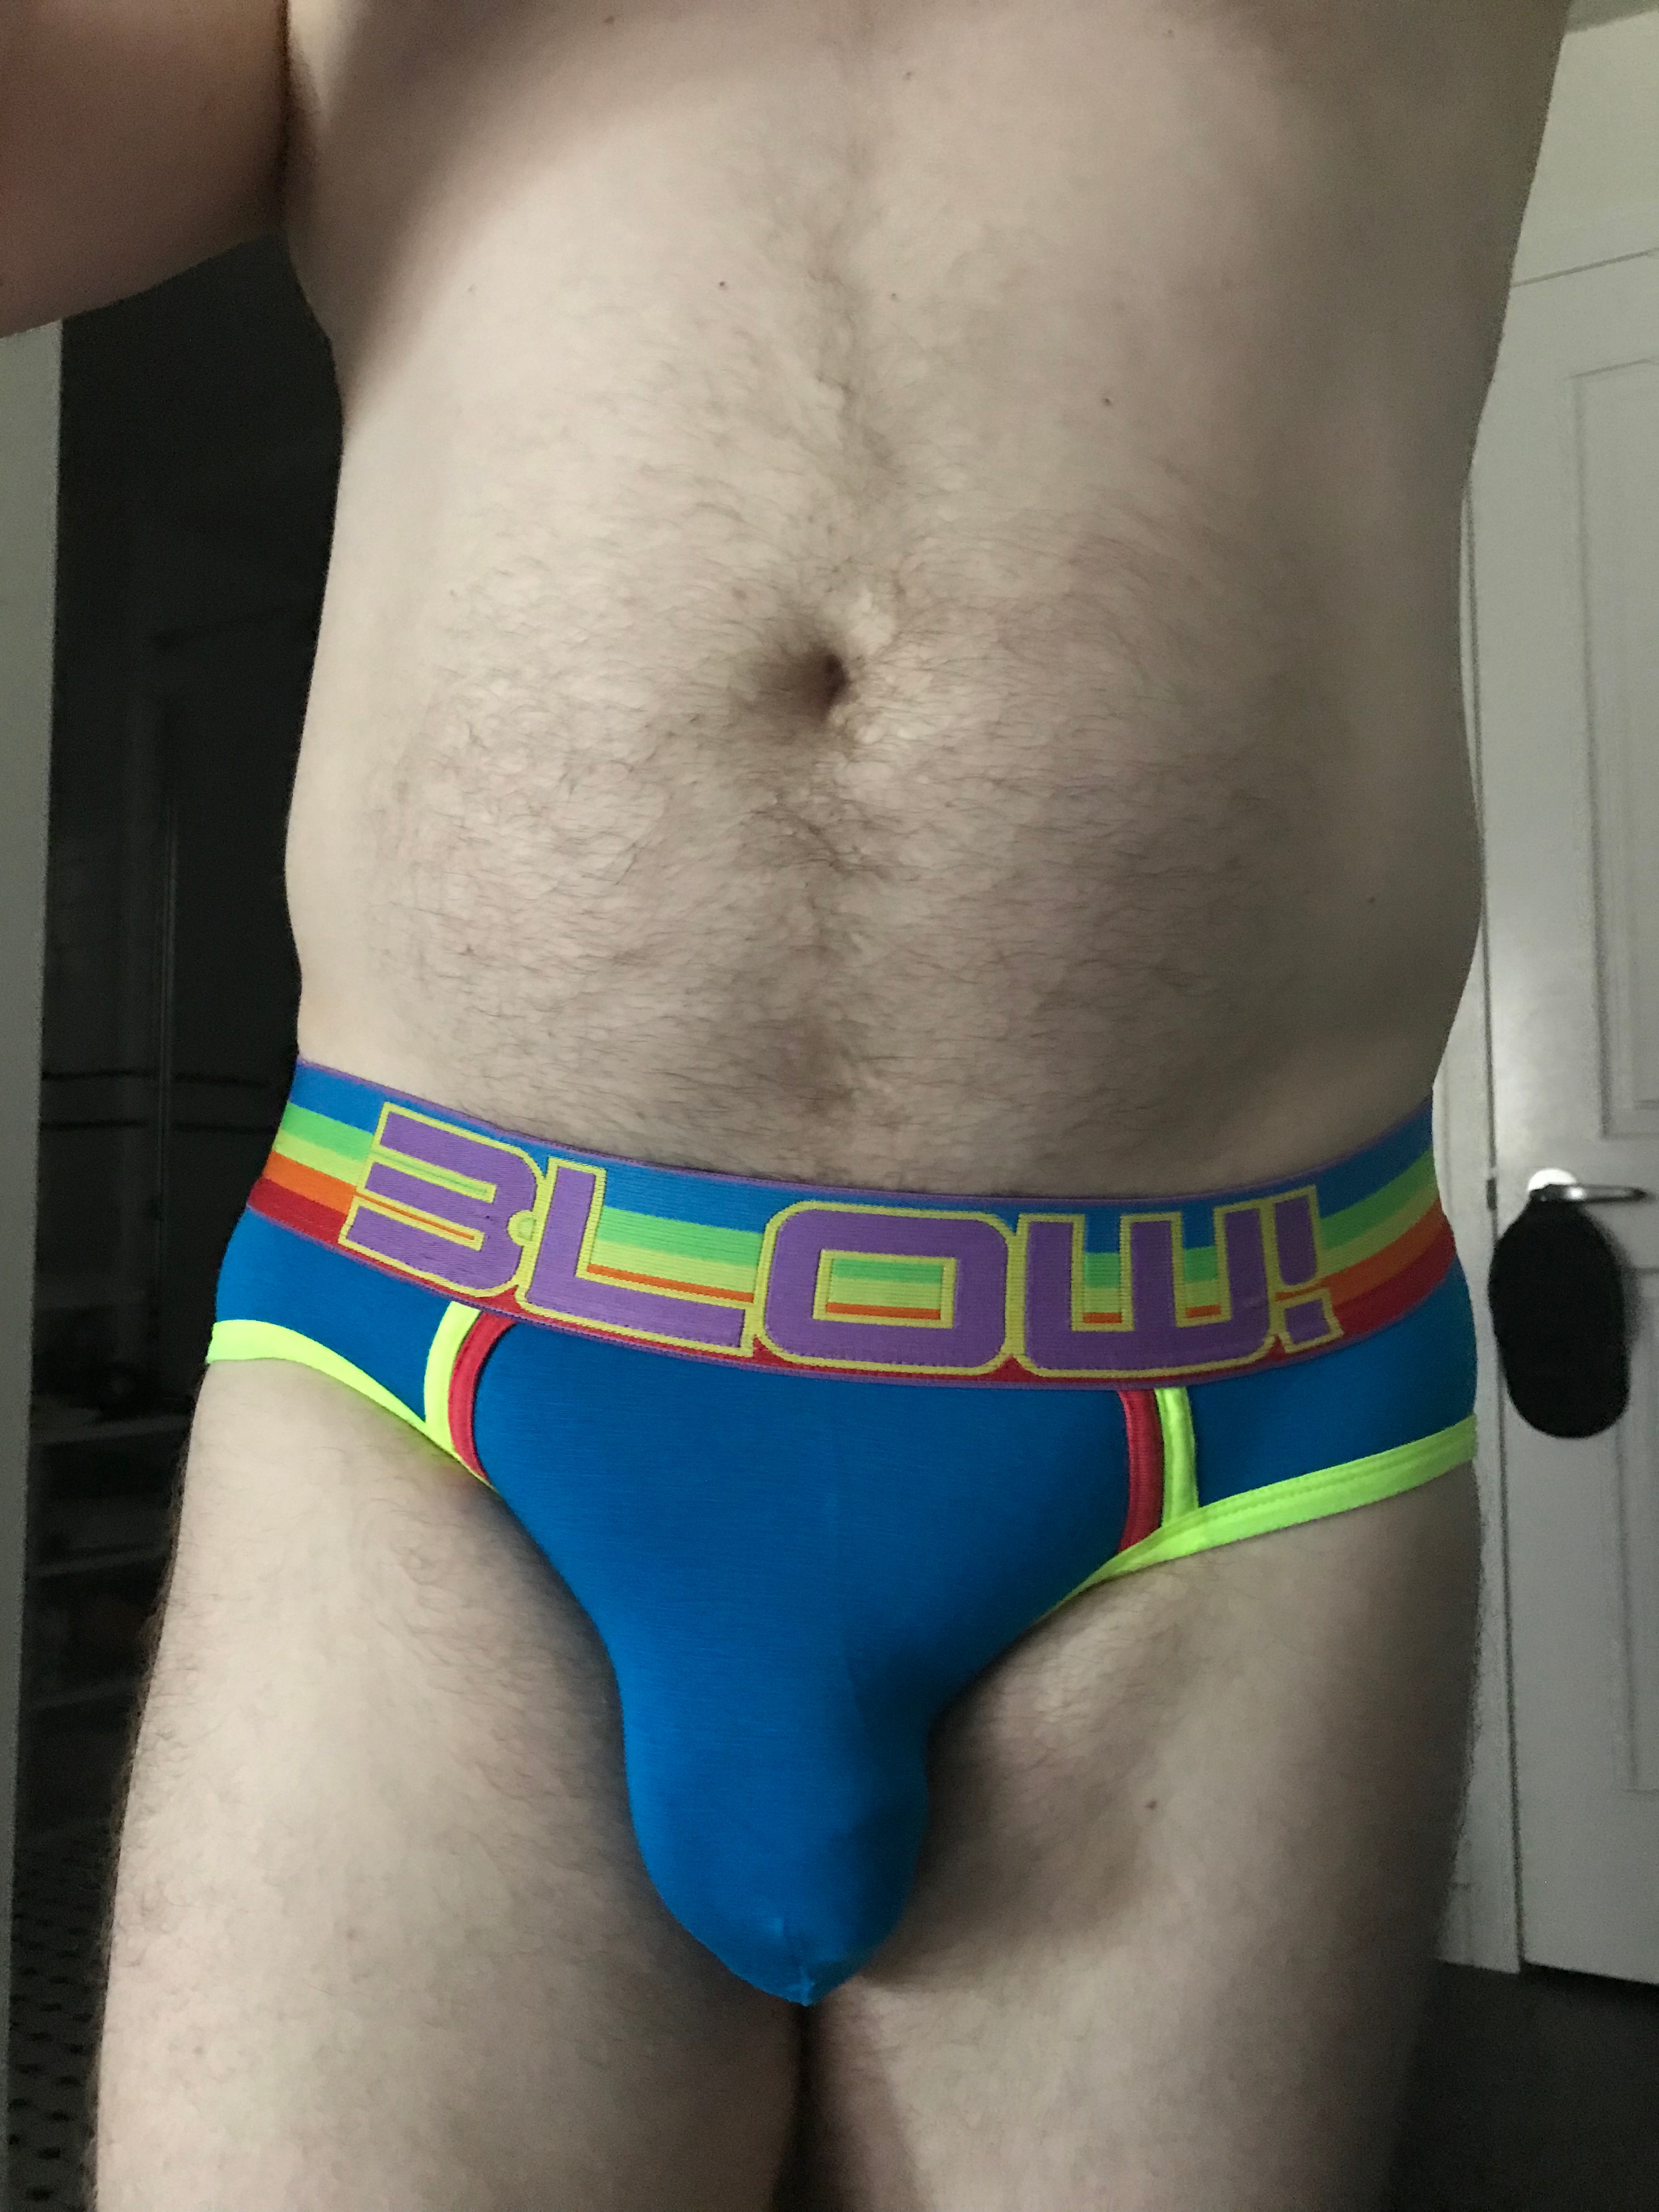 PRIDE briefs to end the week…it’s Pride somewhere, right?